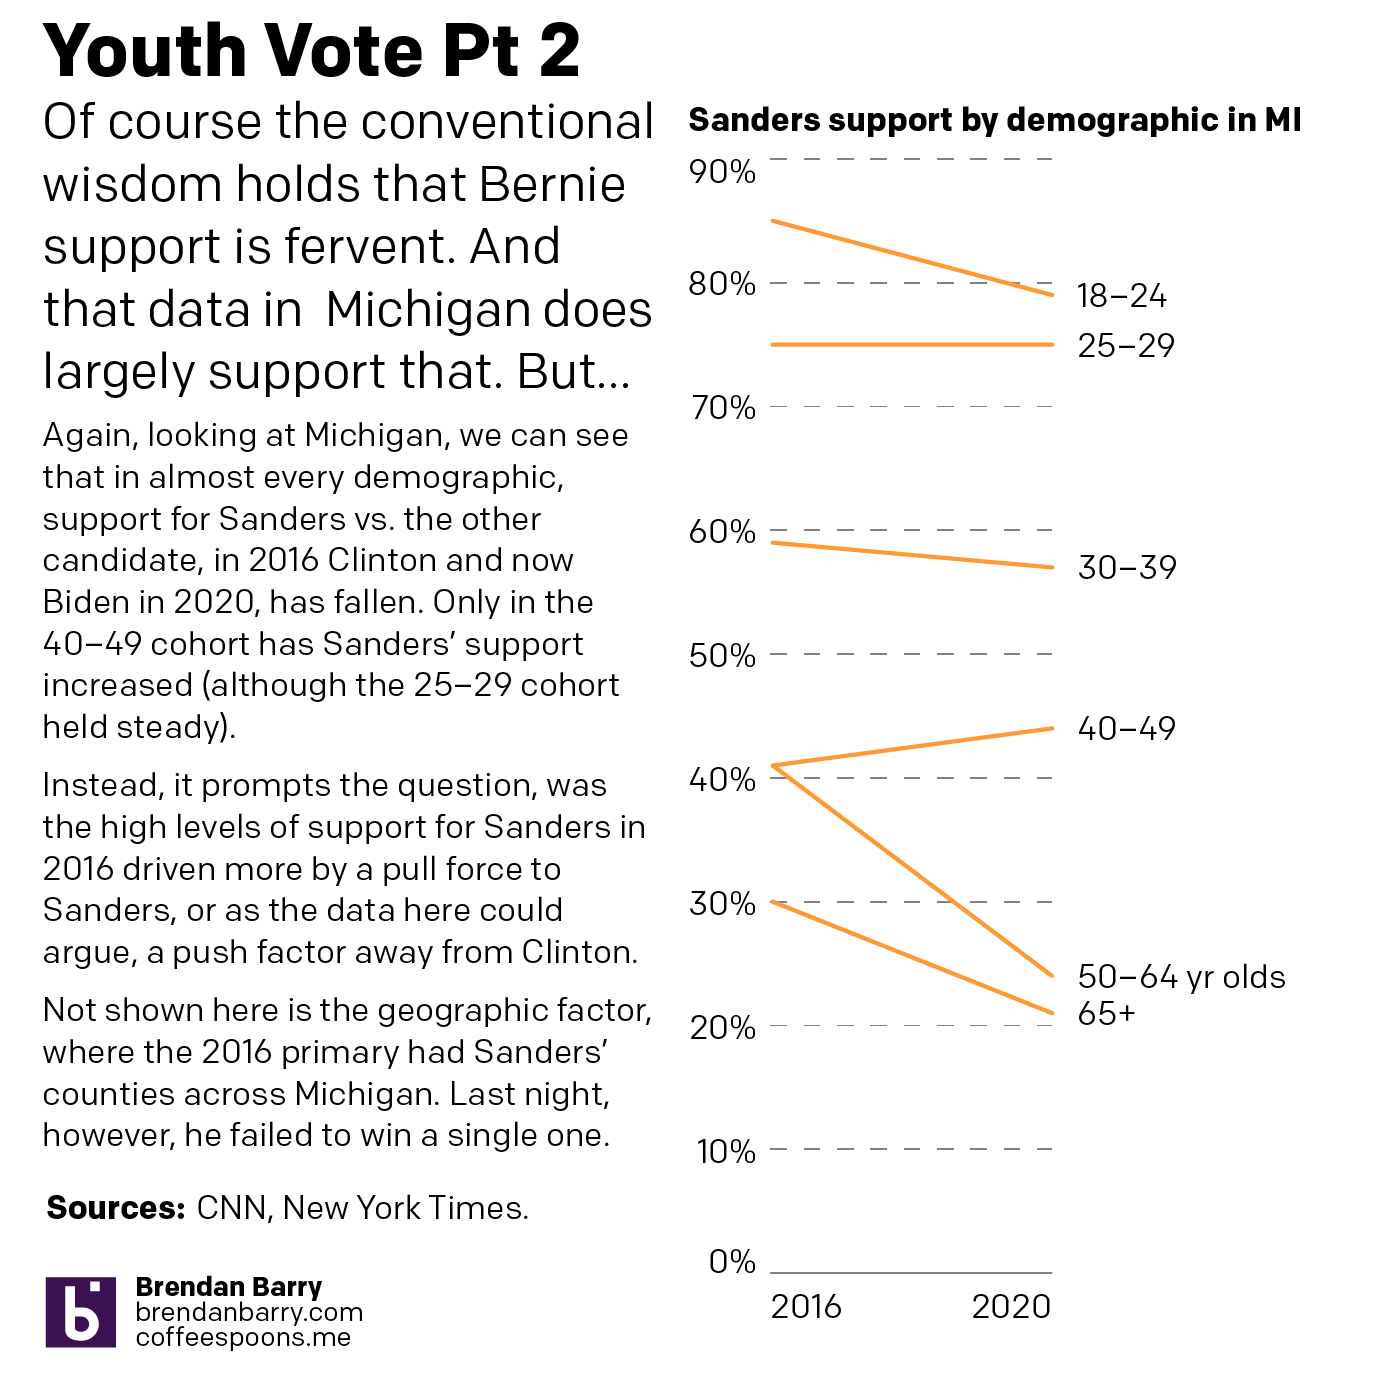 Sanders' support in Michigan was down in most demographic cohorts